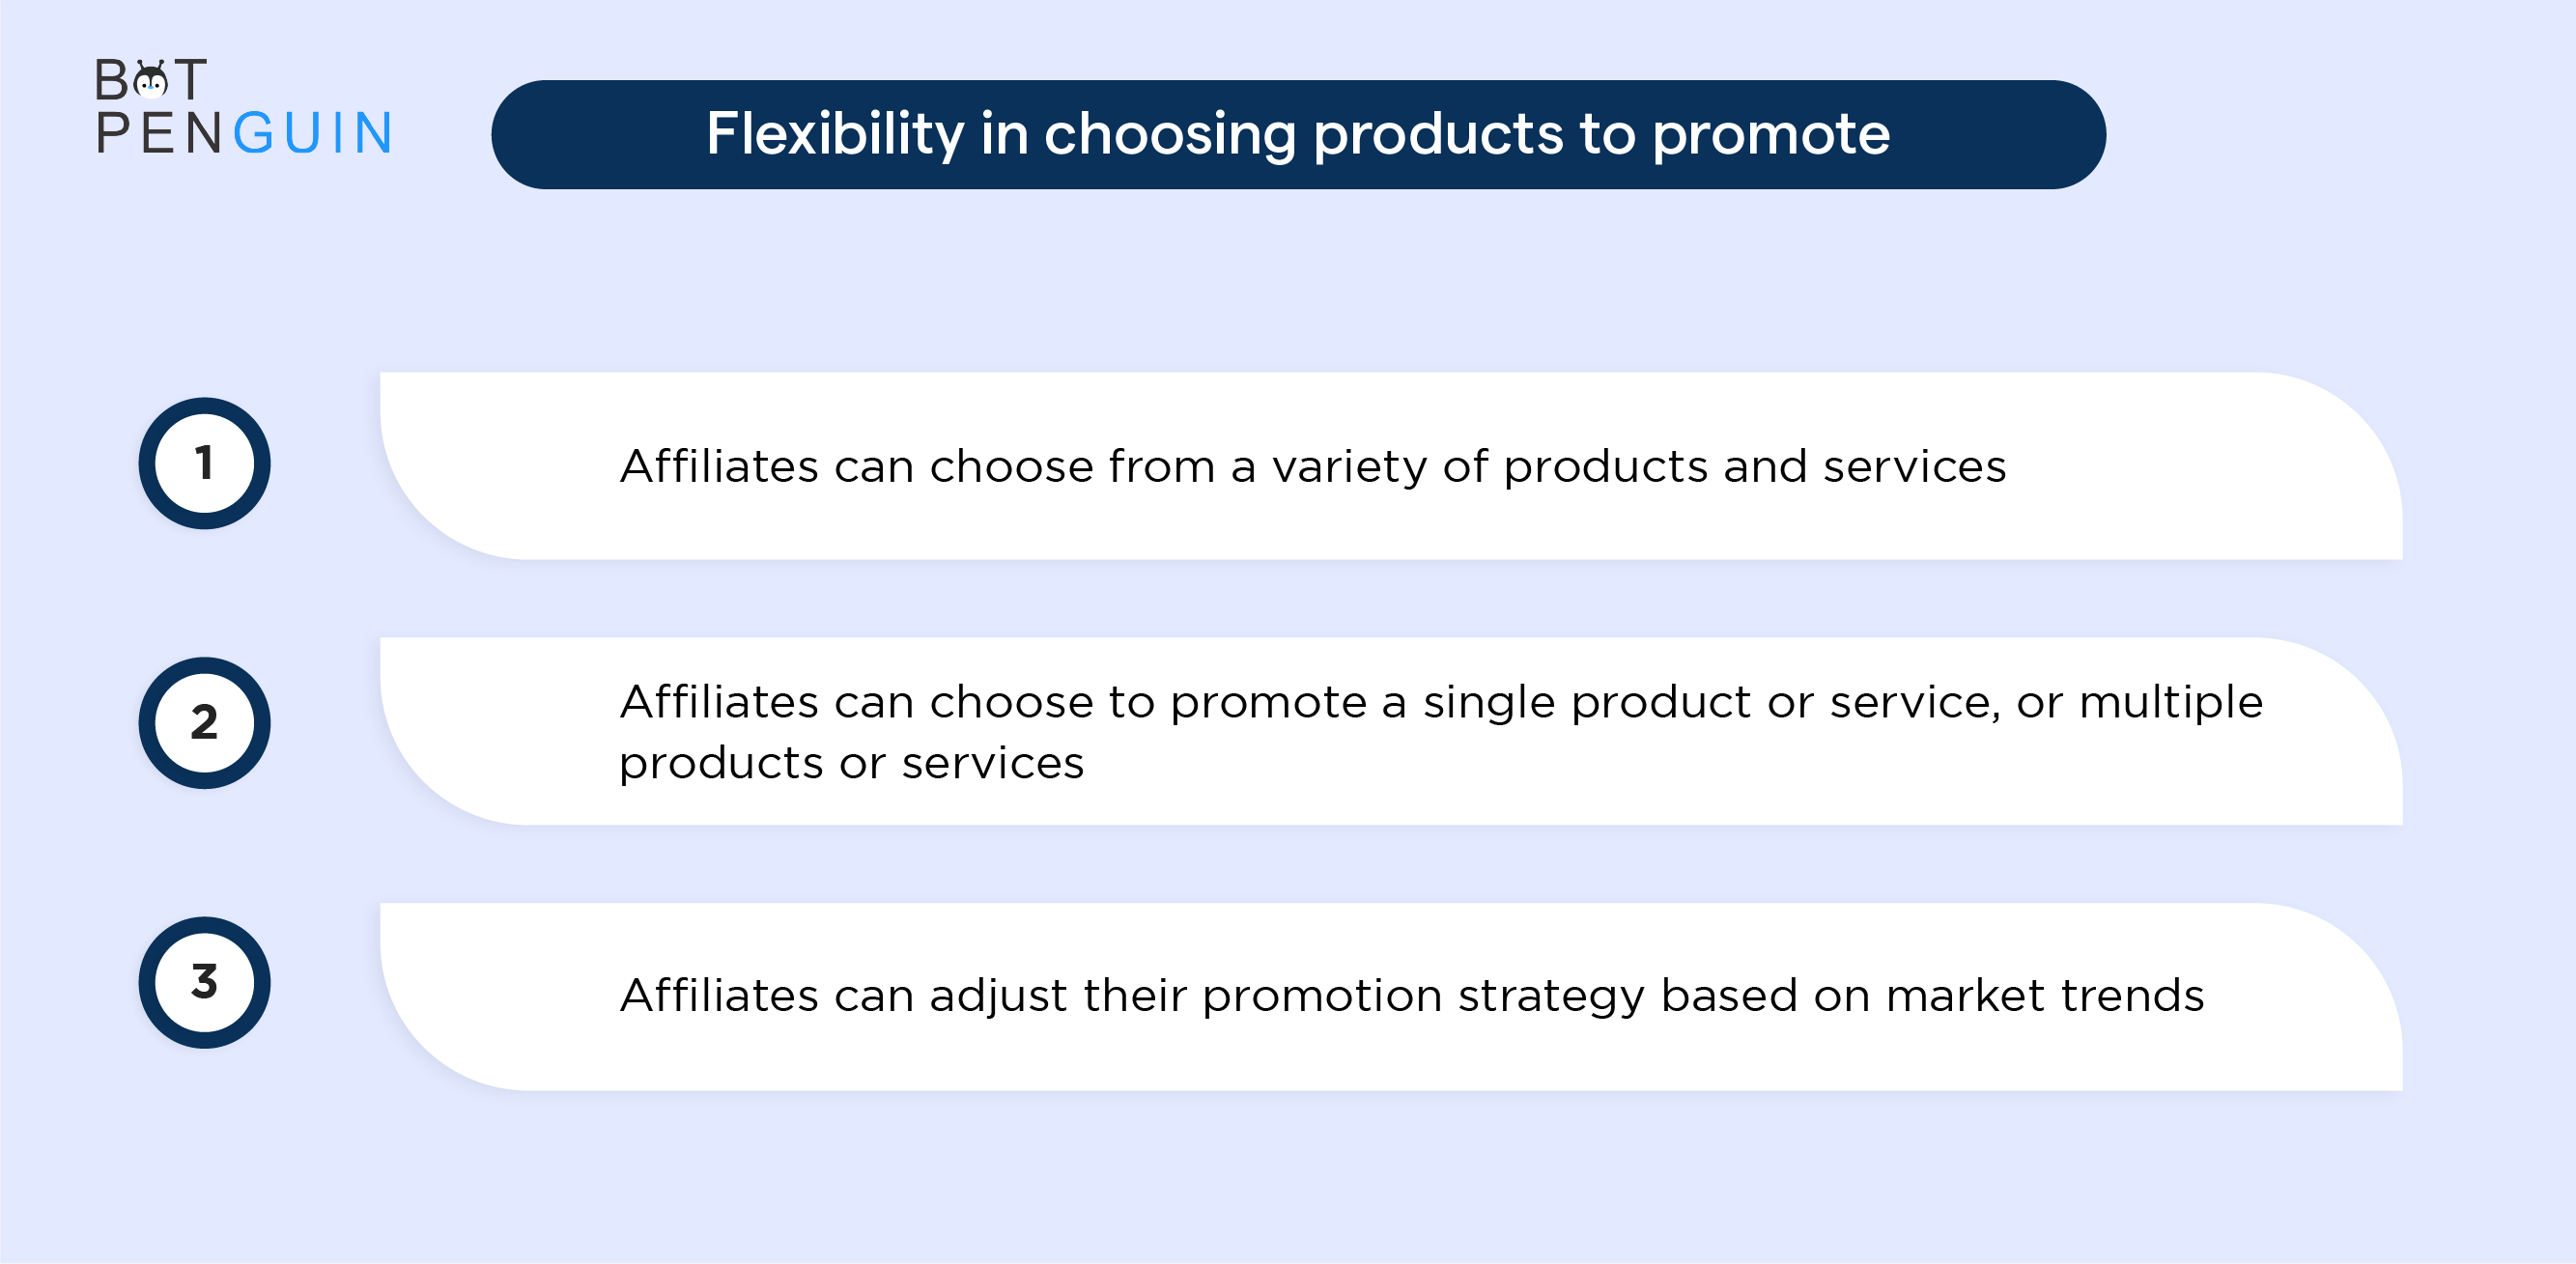 Flexibility in choosing products to promote.